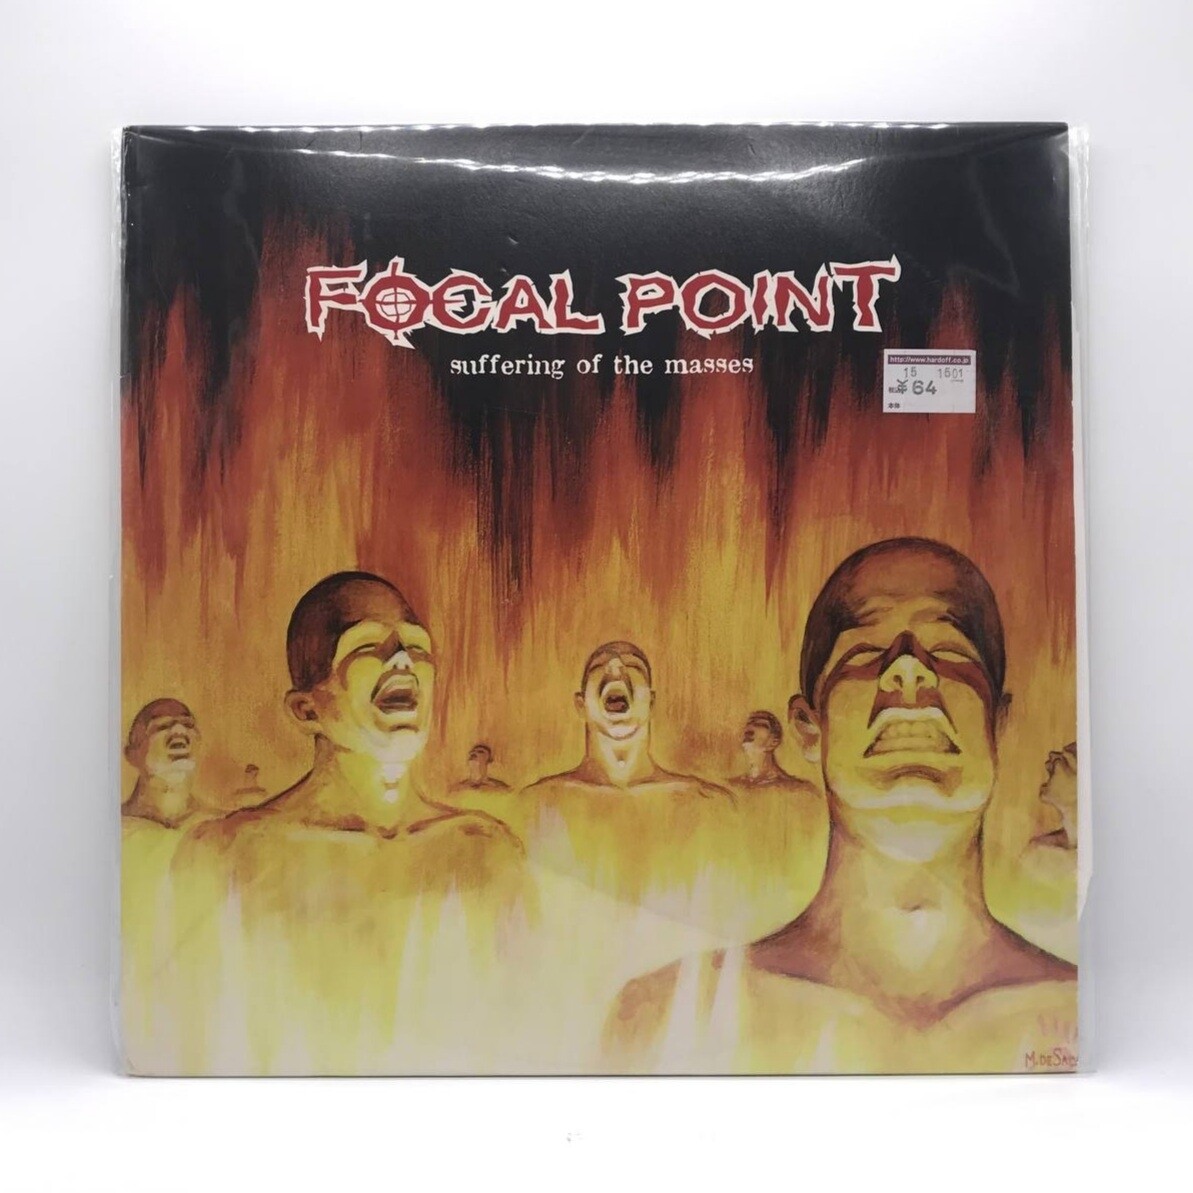 [USED] FOCAL POINT -SUFFERING OF THE MASSES- LP